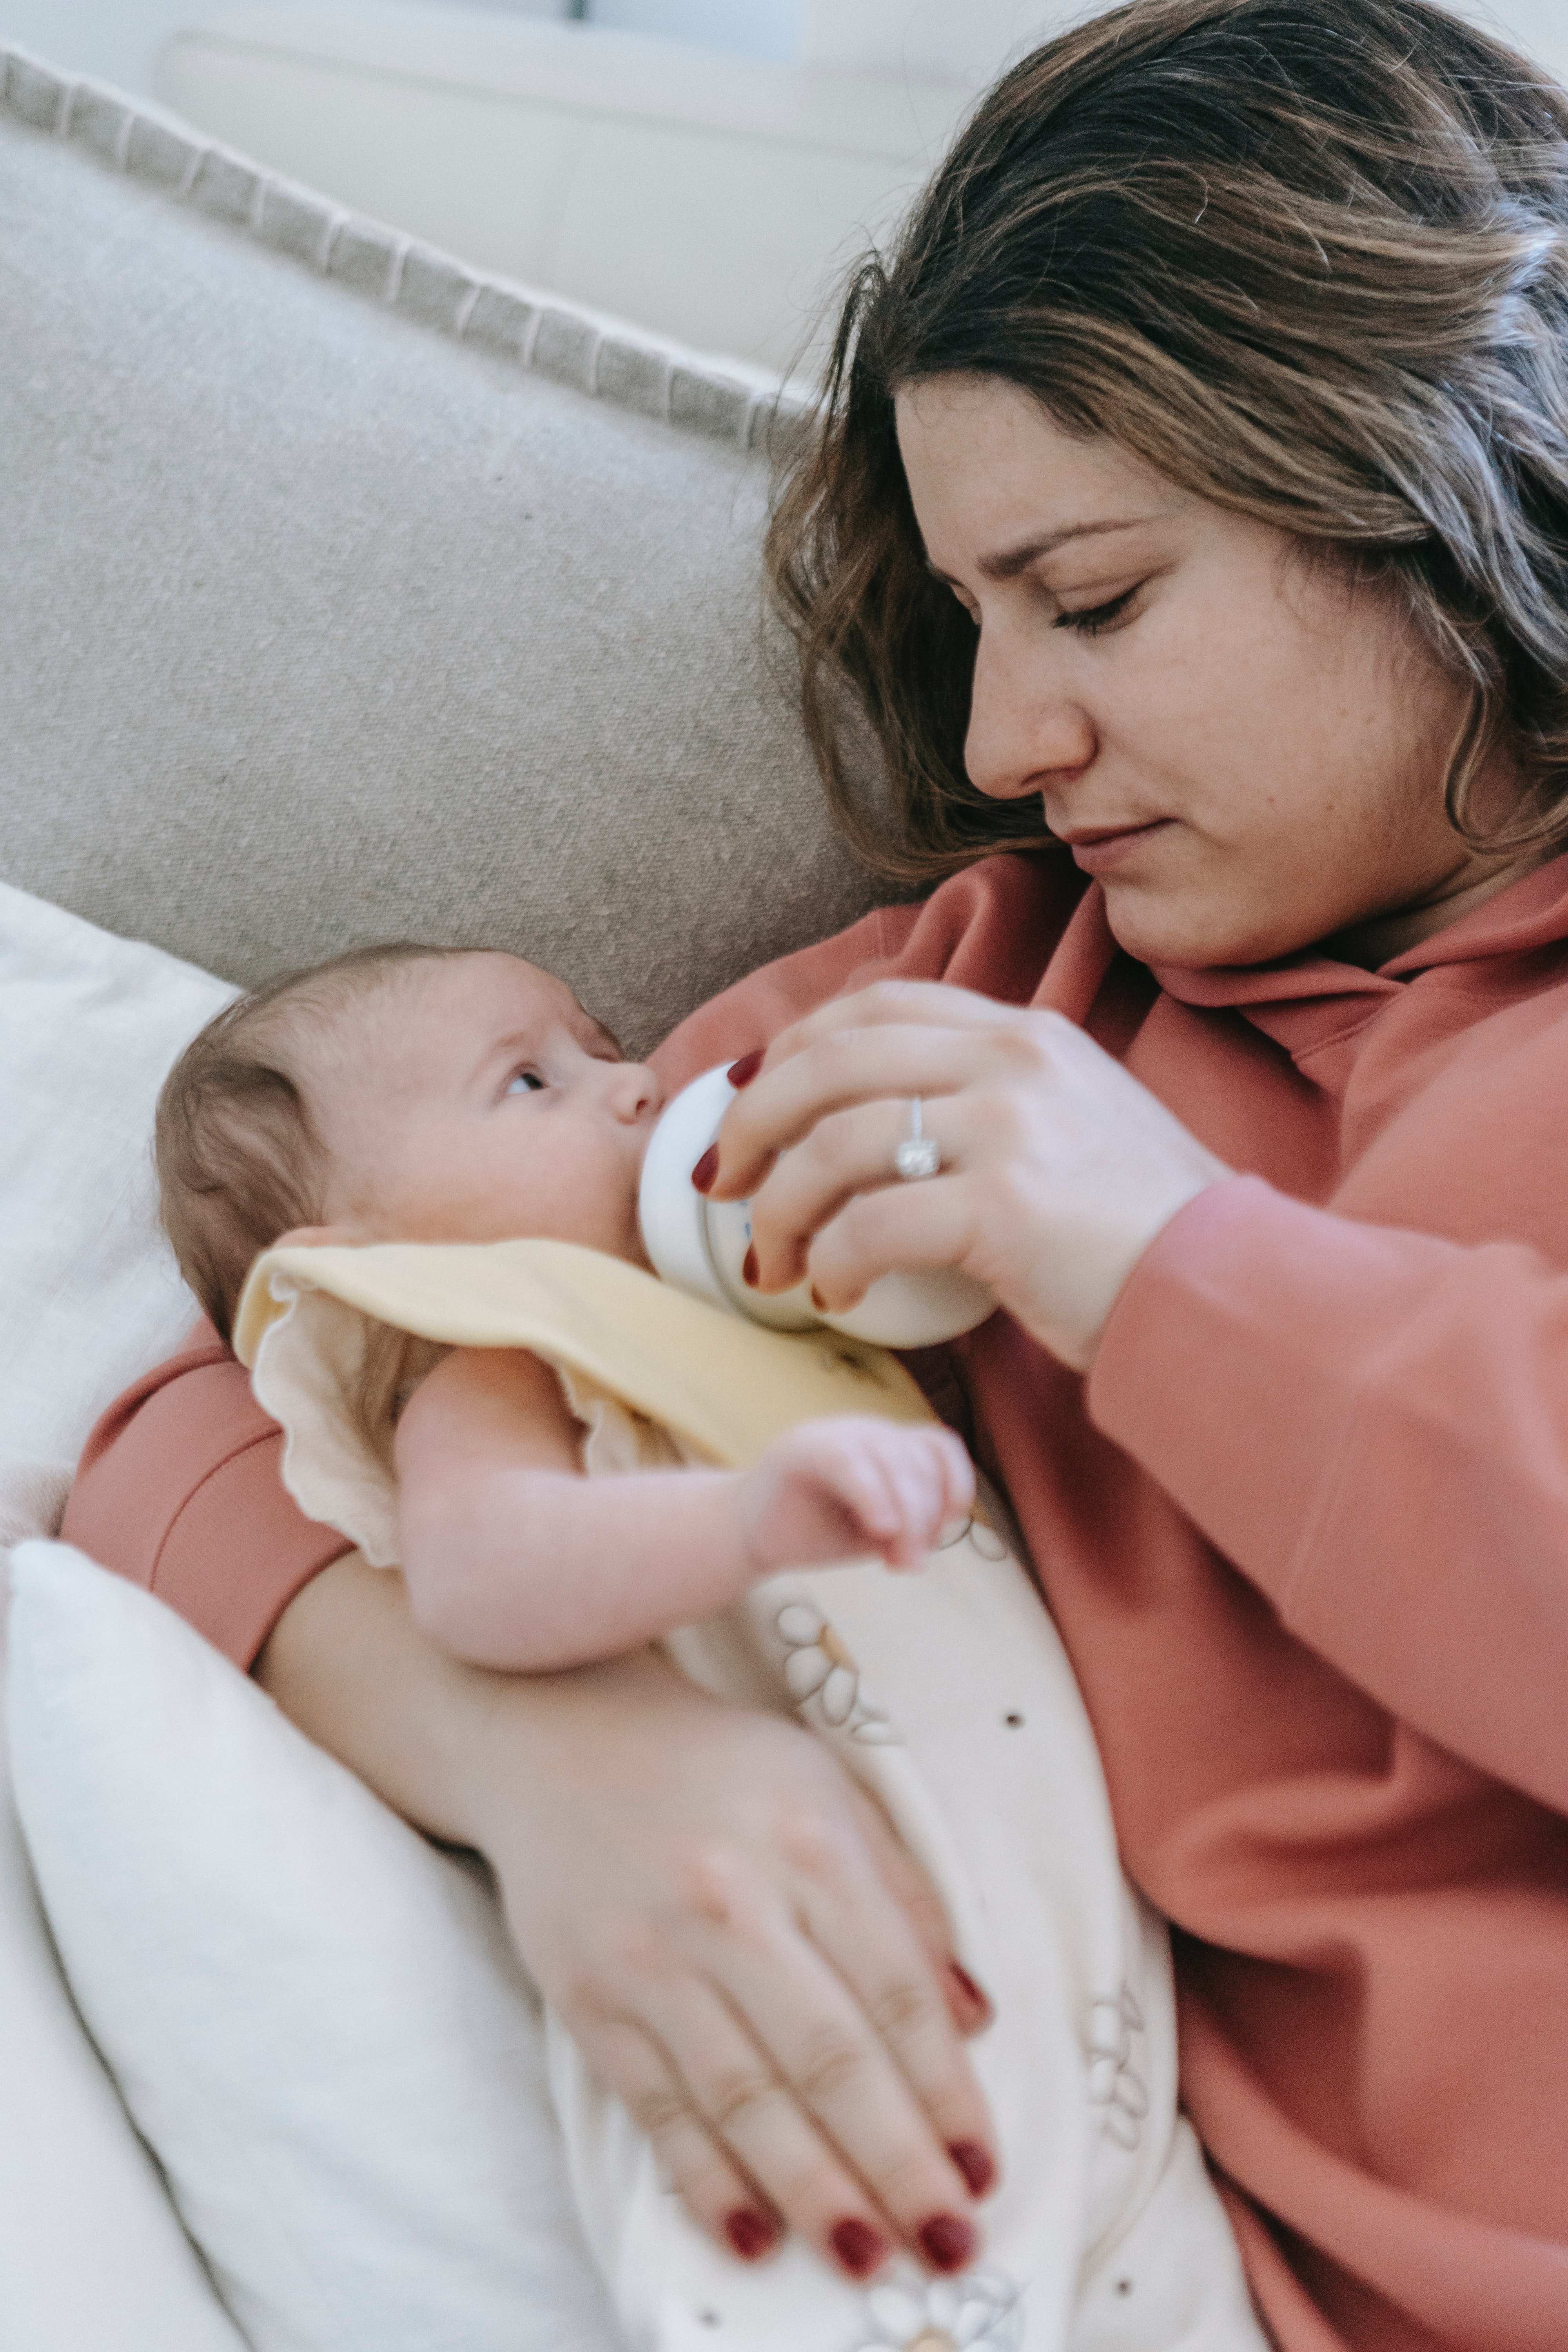 A mother feeds a baby from the bottle. | Source: Pexels